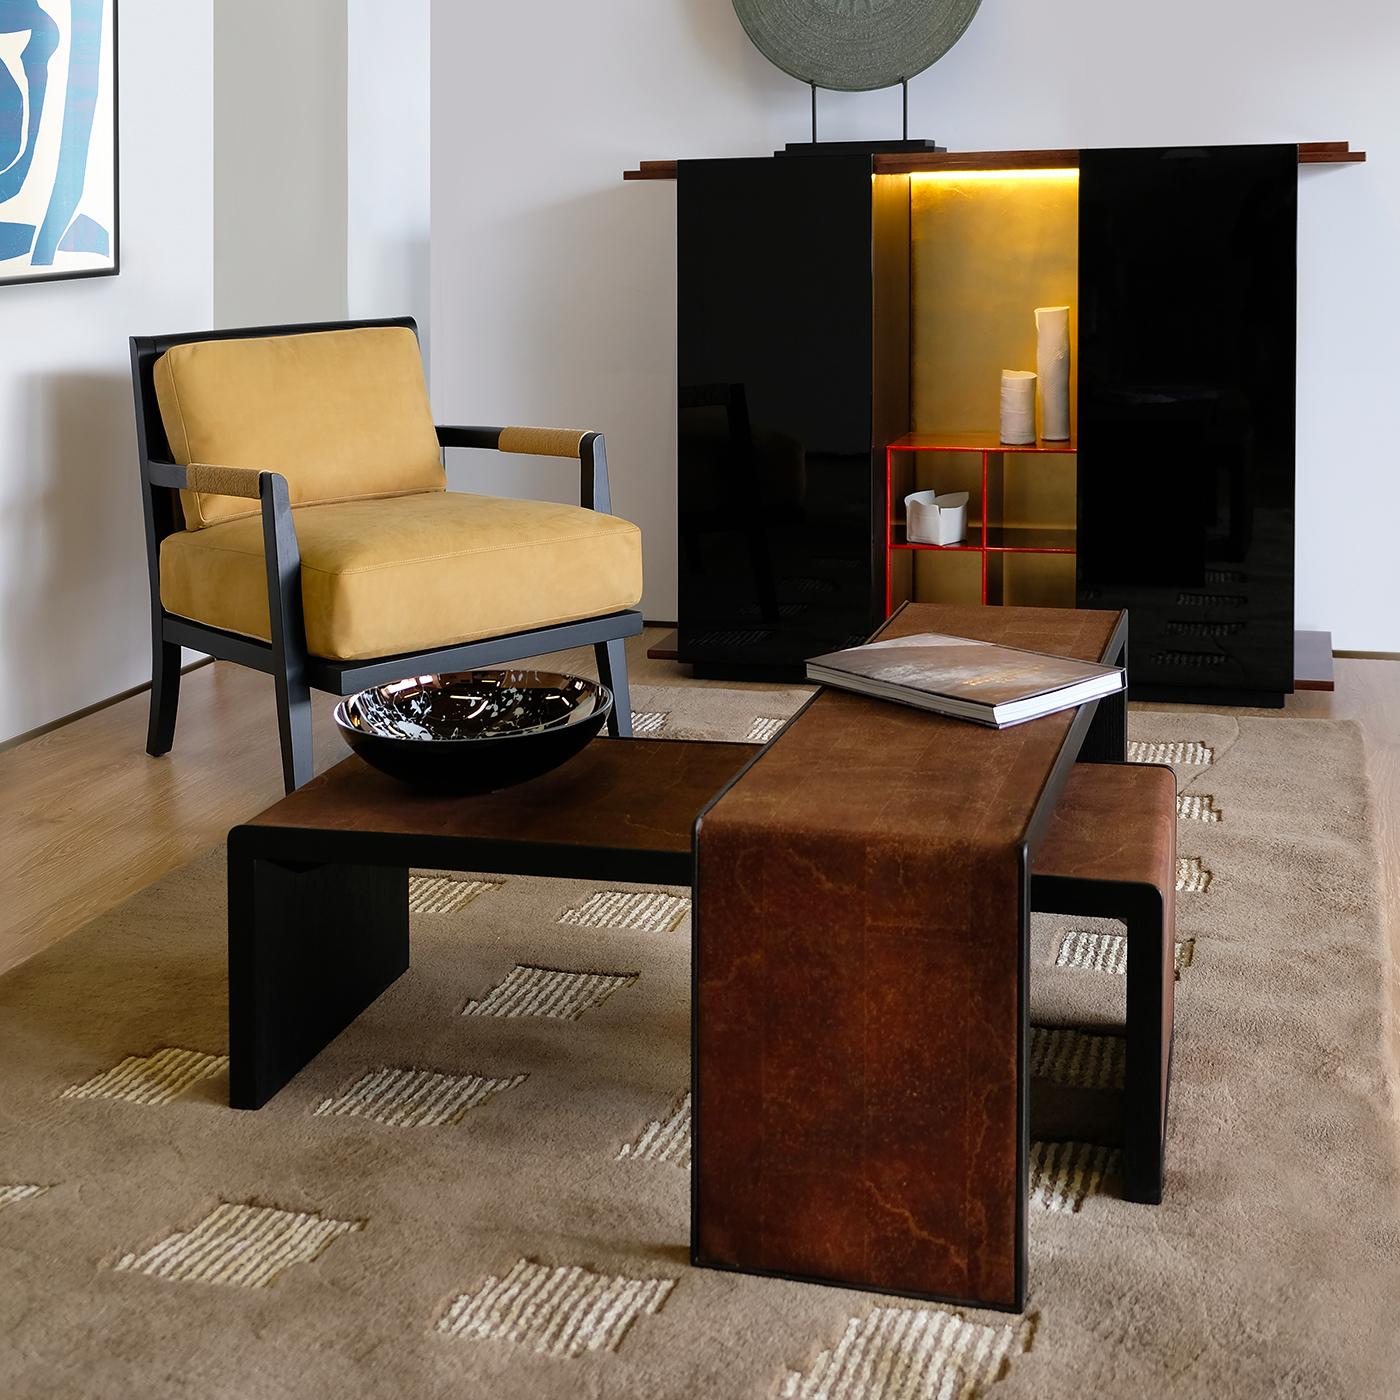 Available in 10 different colors, this cabinet has an eye-catching design defined by an engaging play between open and closed spaces. The warm Canaletto walnut top and base meet the cold finish of the glossy black polyurethane lateral units,